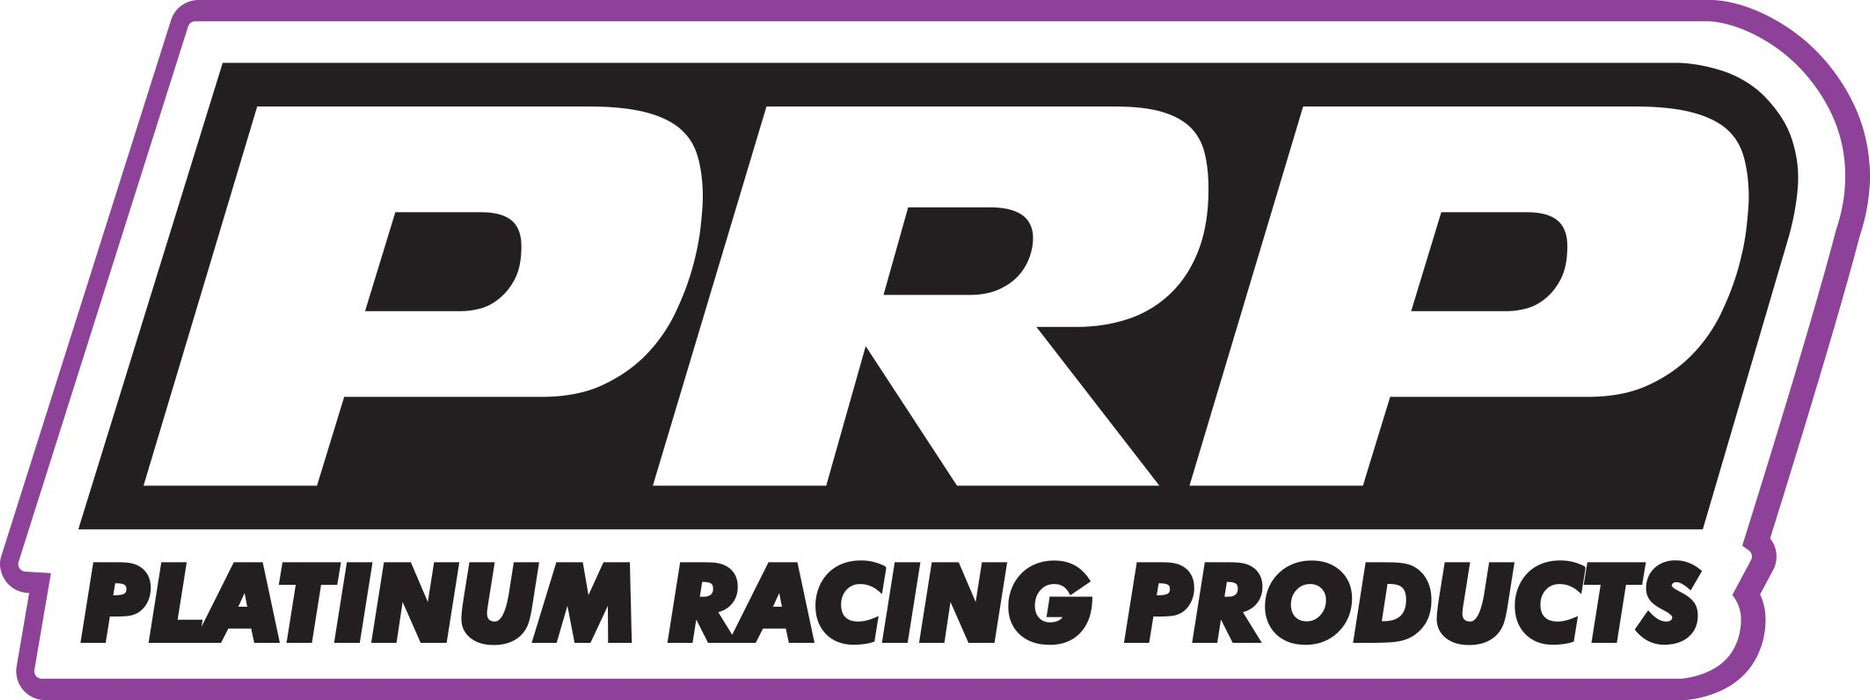 Platinum Racing Products E-Gift Card